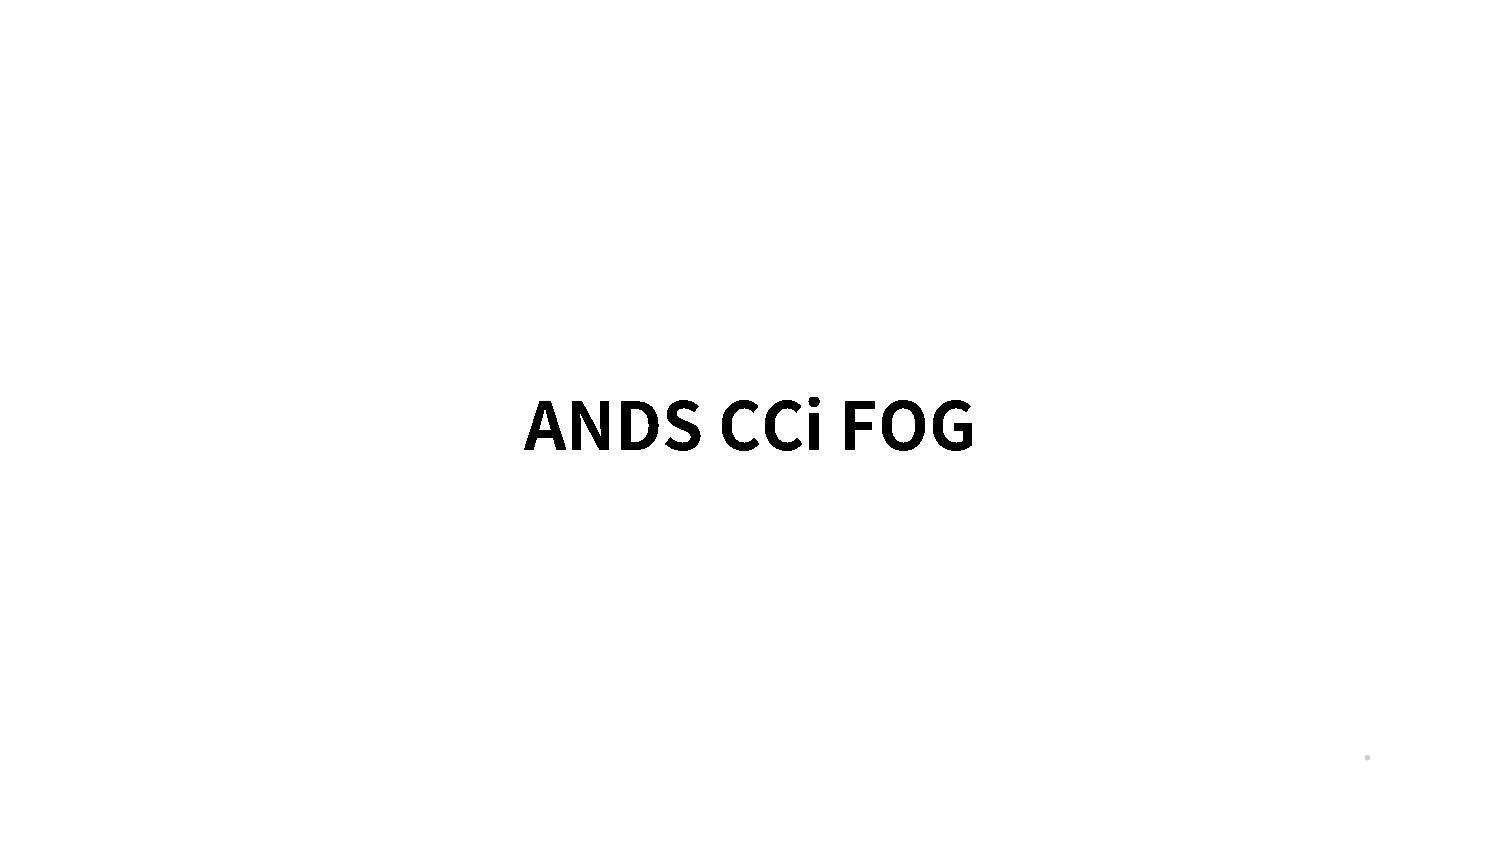 ANDS CCI FOG